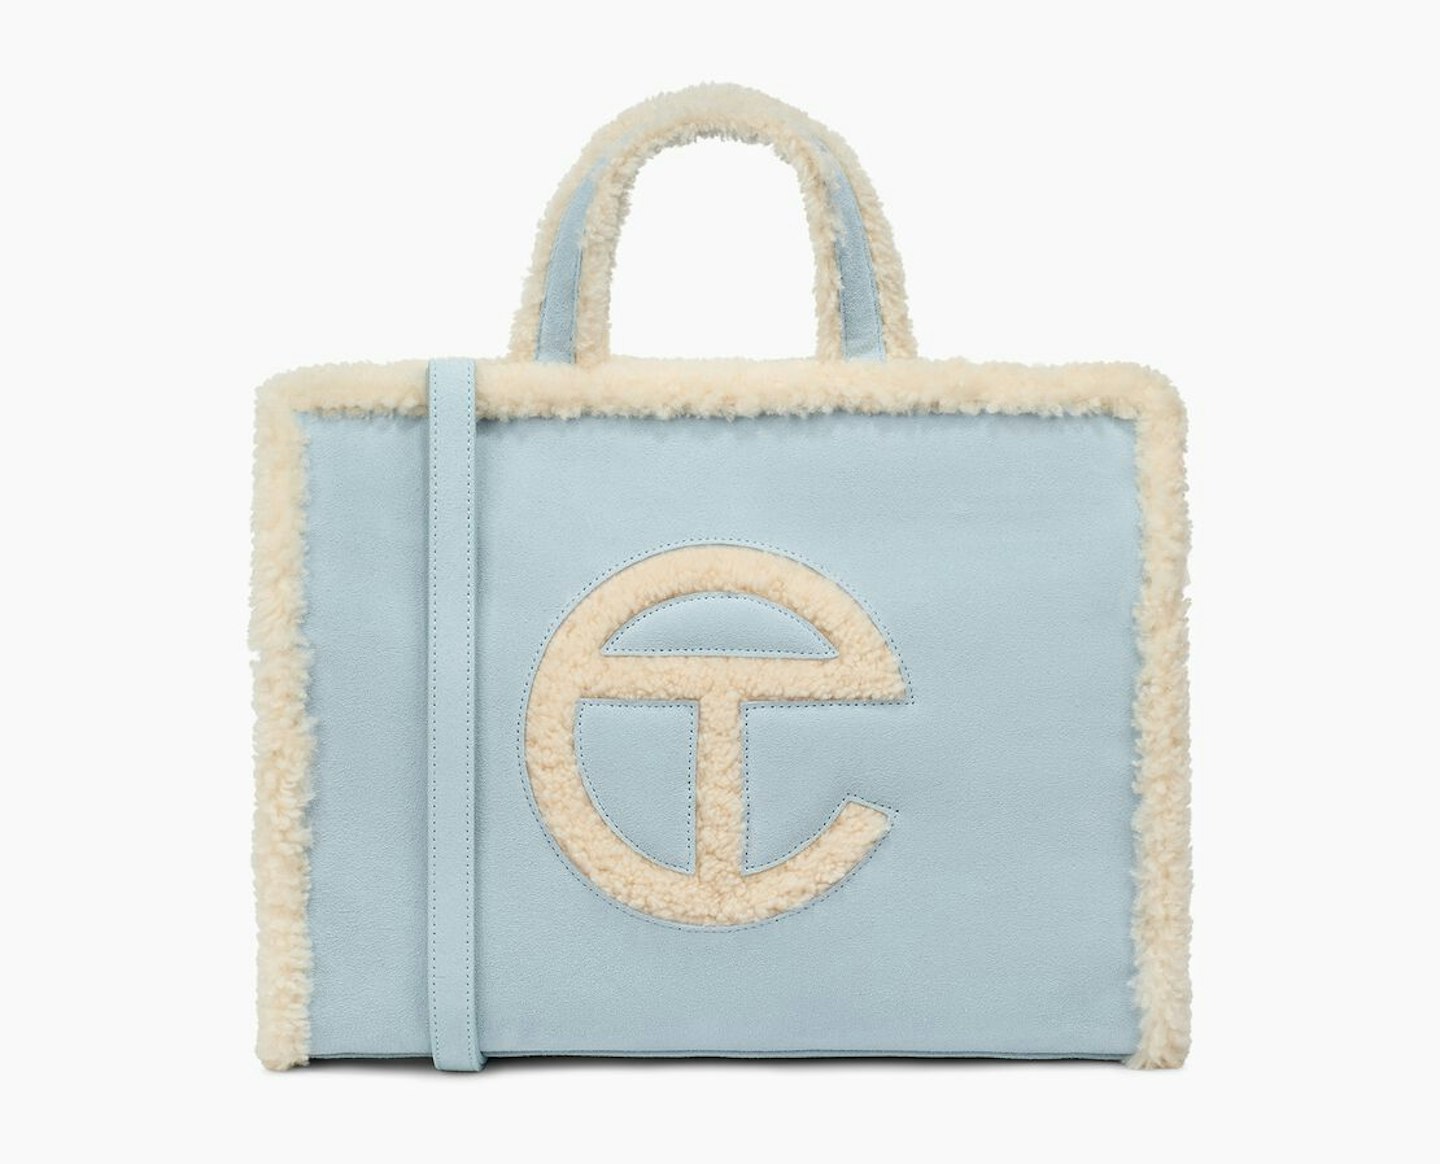 Here's How You Can Get Your Hands on the Ugg x Telfar Shopping Bag